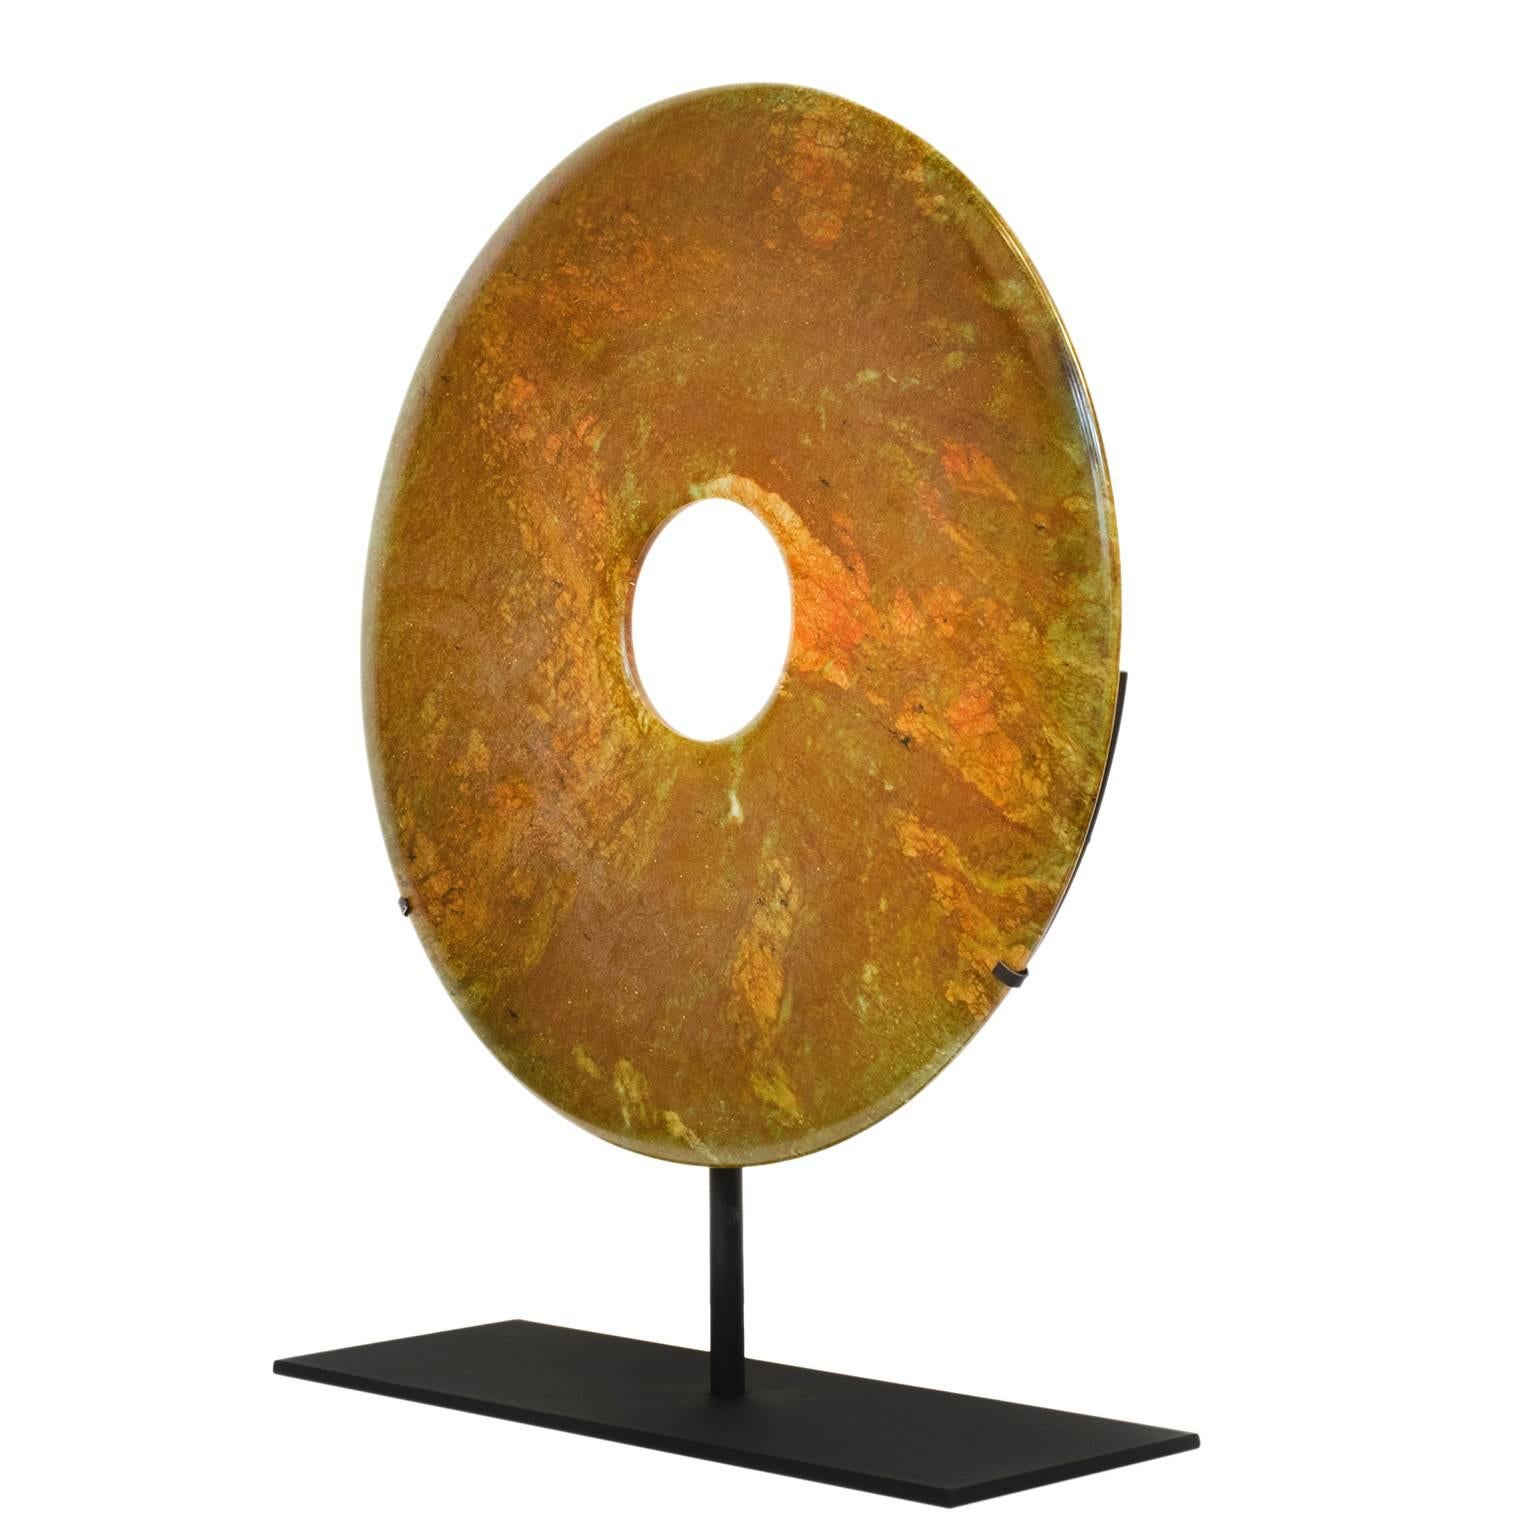 A beautiful orange carved stone Chinese Bi Disc, a symbol of heaven and wealth, mounted on a custom steel stand.